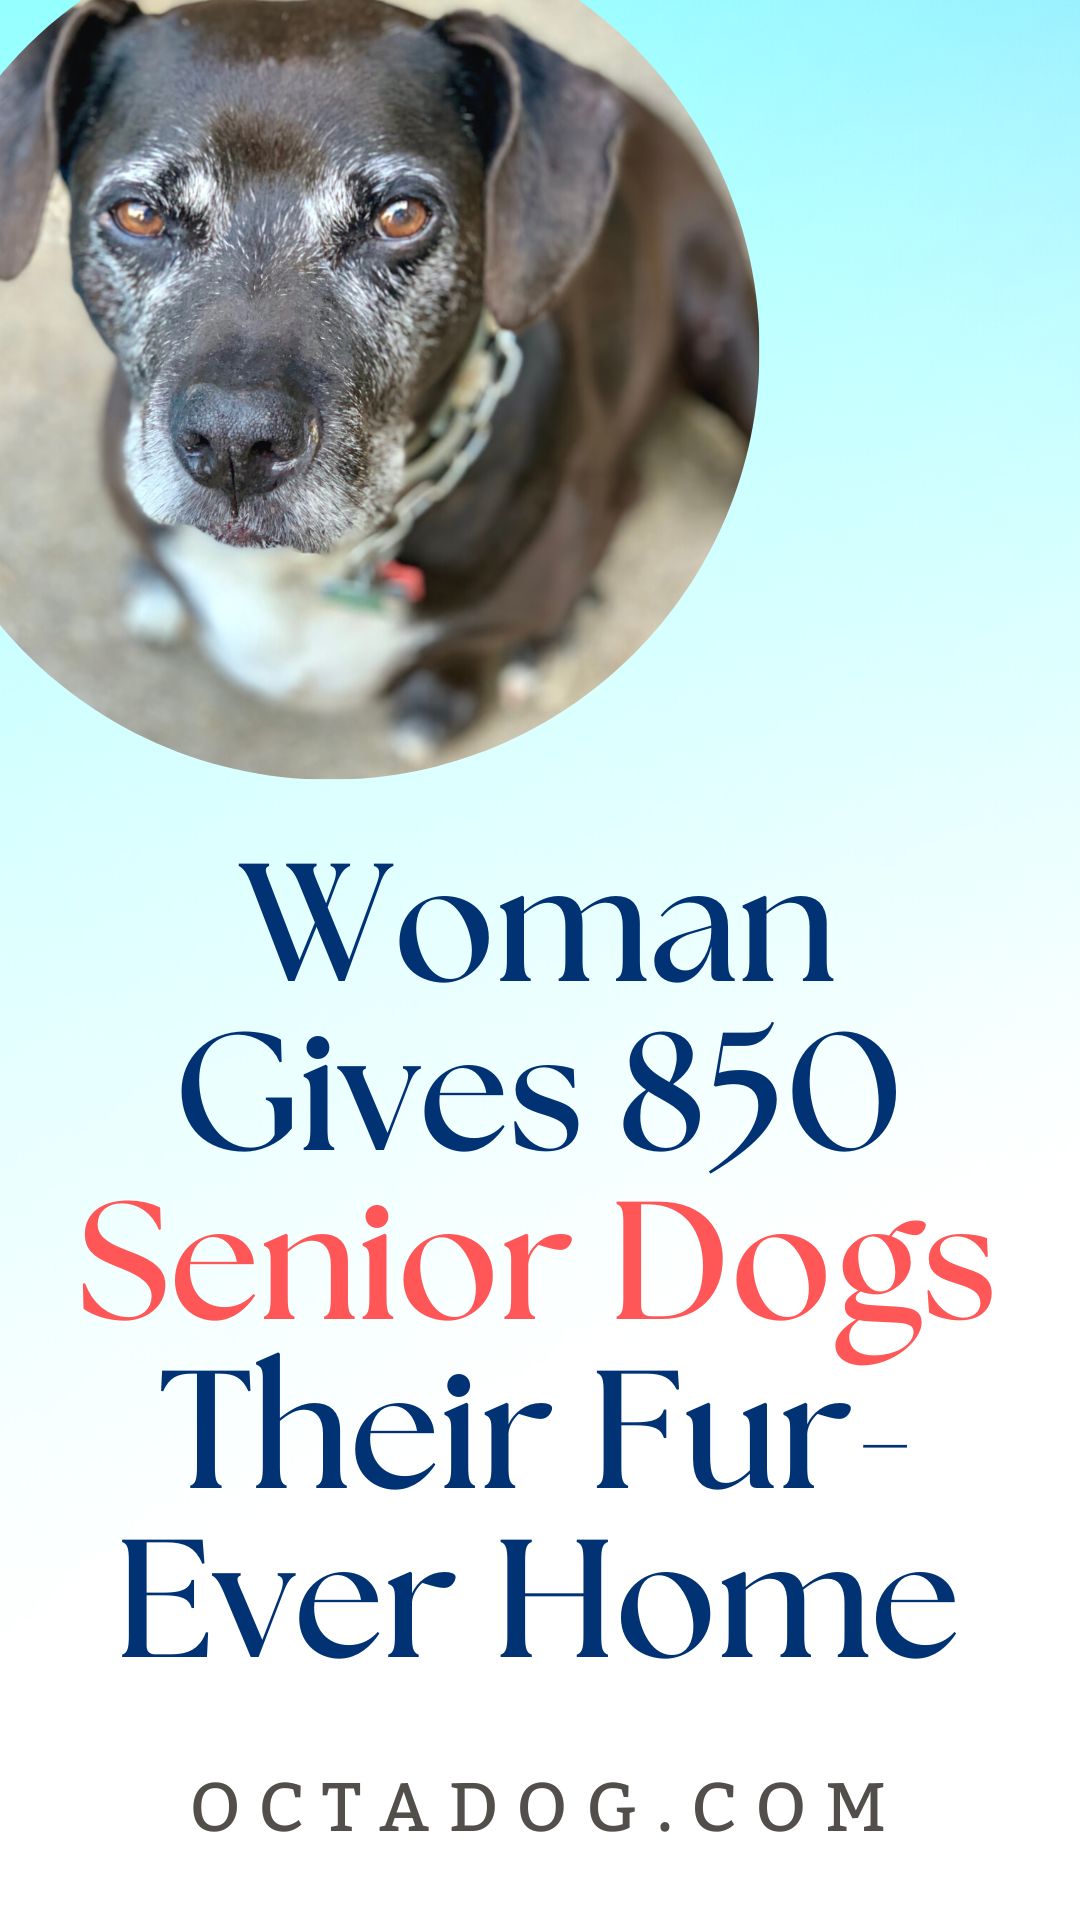 Woman Gives 850 Senior Dogs Their Fur-Ever Home / Canva